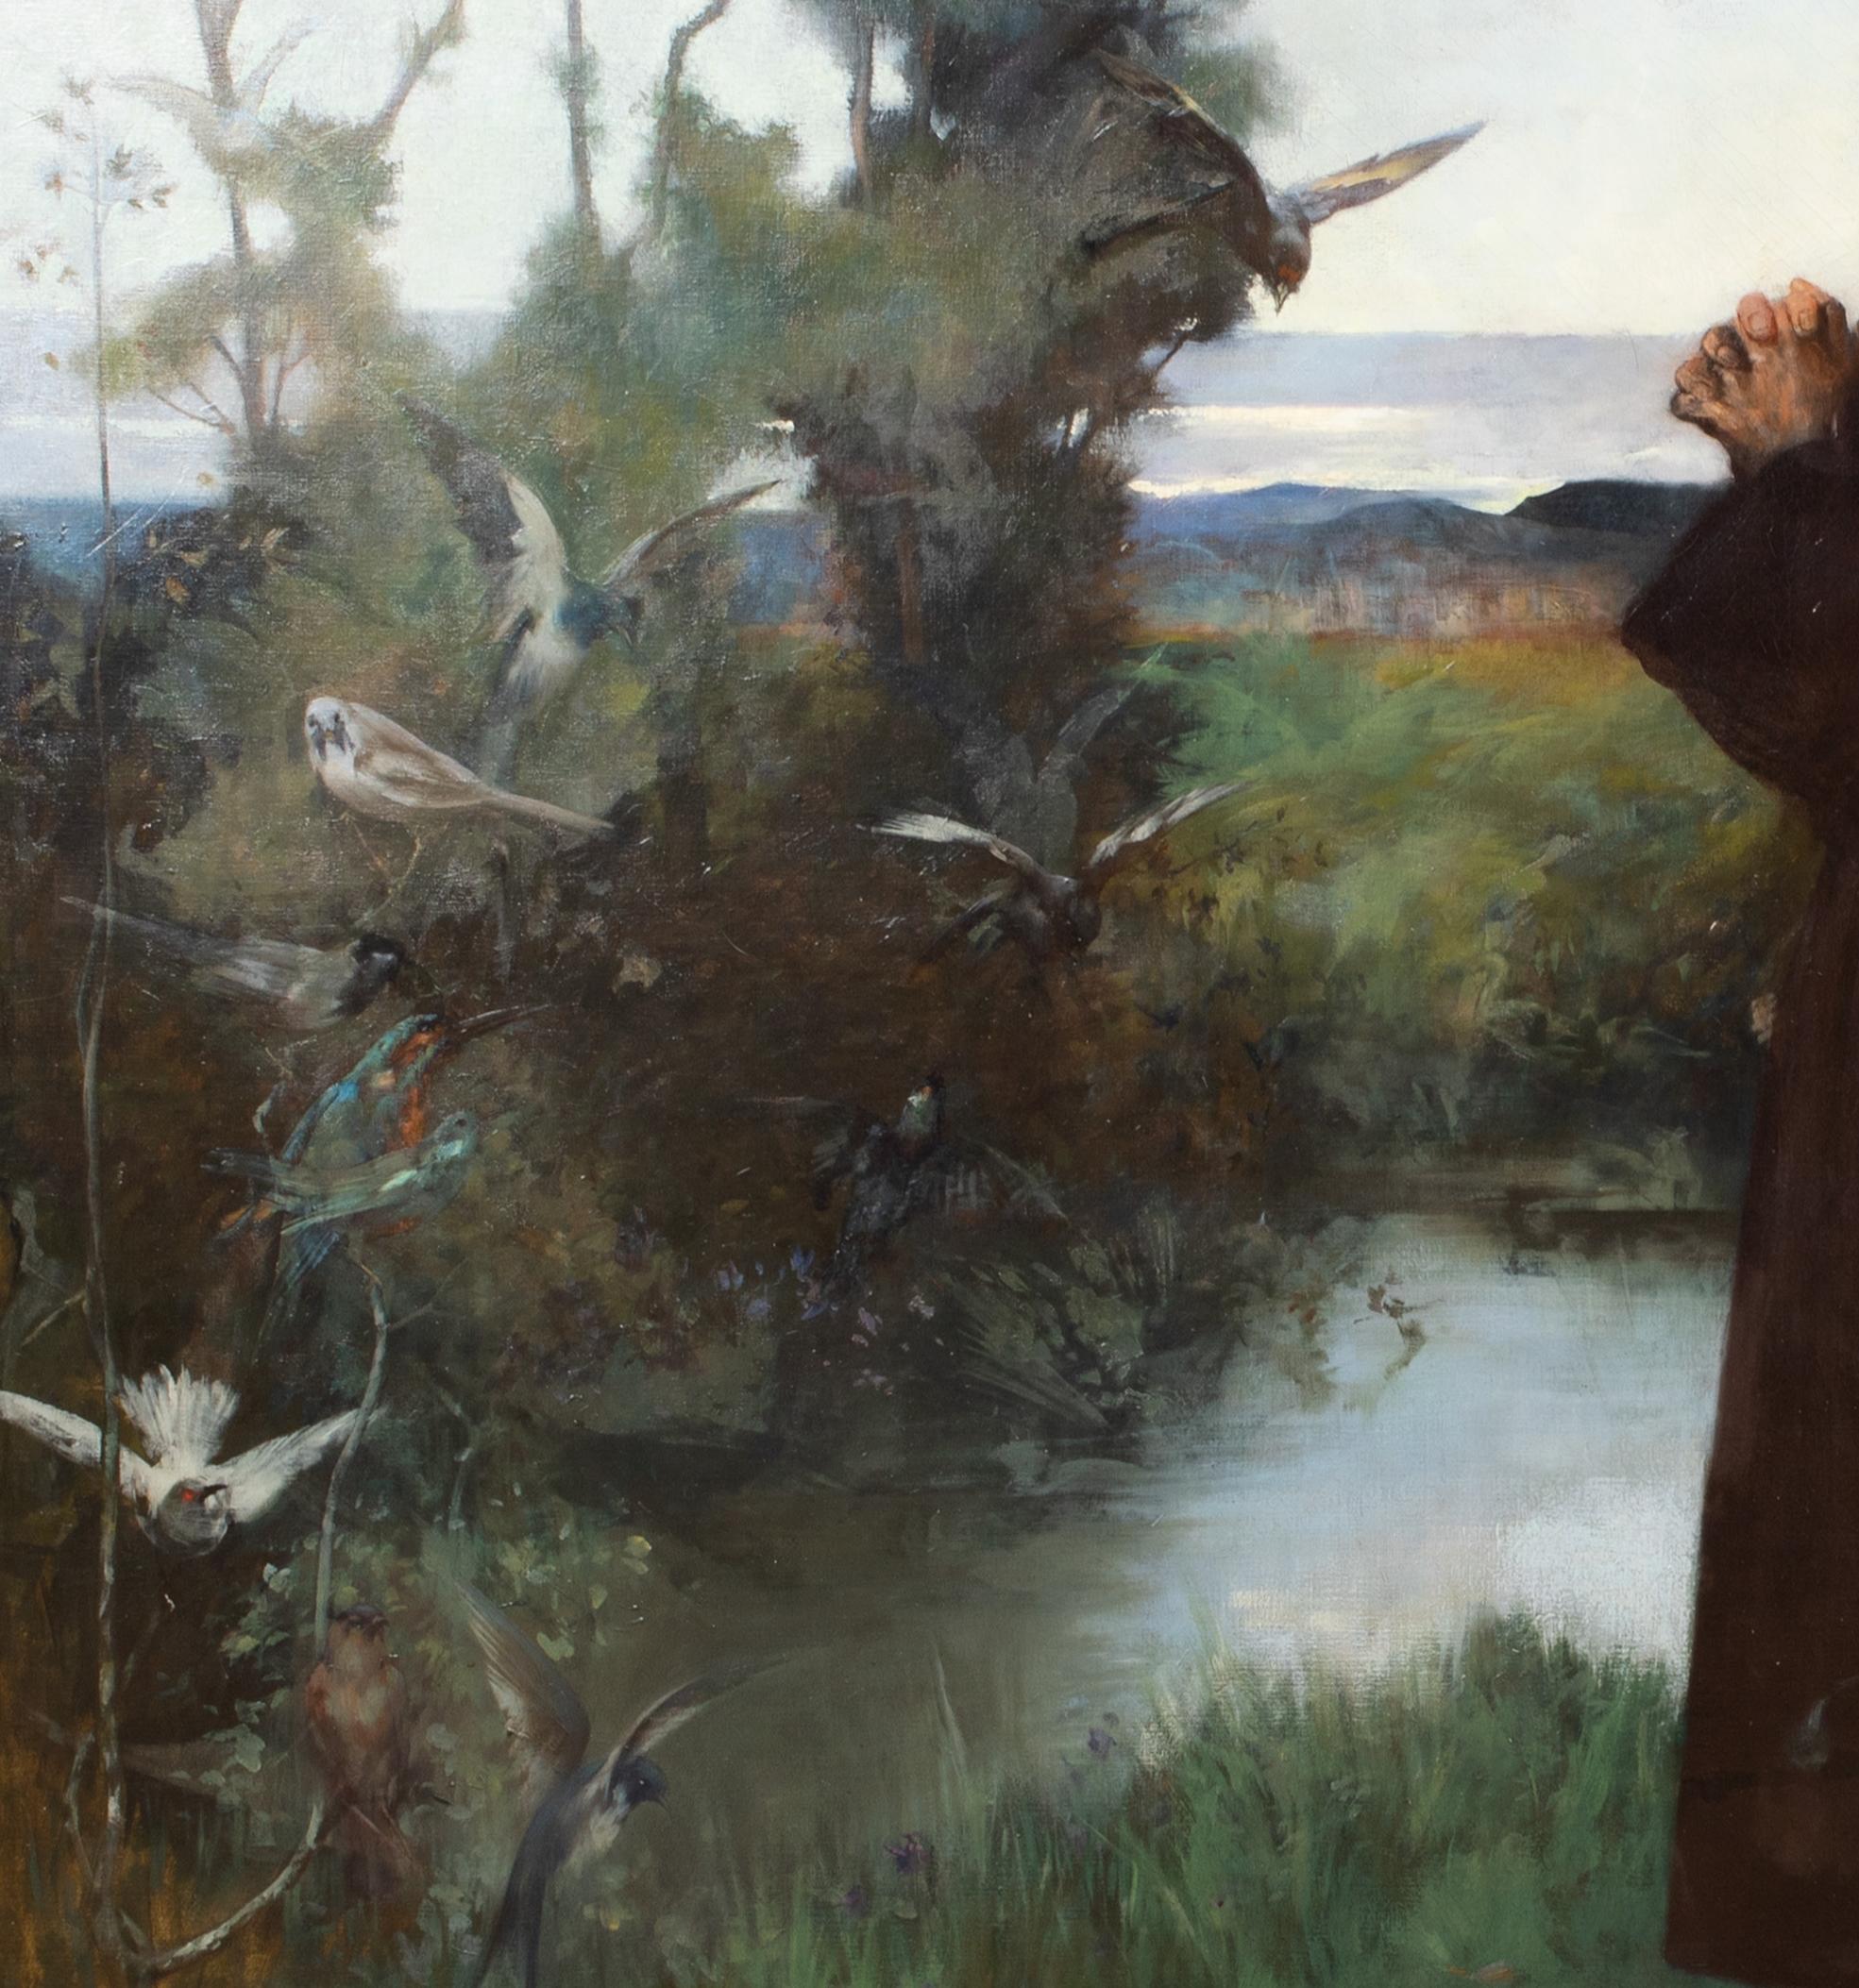 Saint Francis of Assisi & His Sermon To The Birds, date 1898

by Albert Chevallier TAYLER (1862-1925) - sales to $700,000

Huge 19th Century Newlyn School depiction of St Francis of Assisi  and his sermon to the birds, oil on canvas by Albert